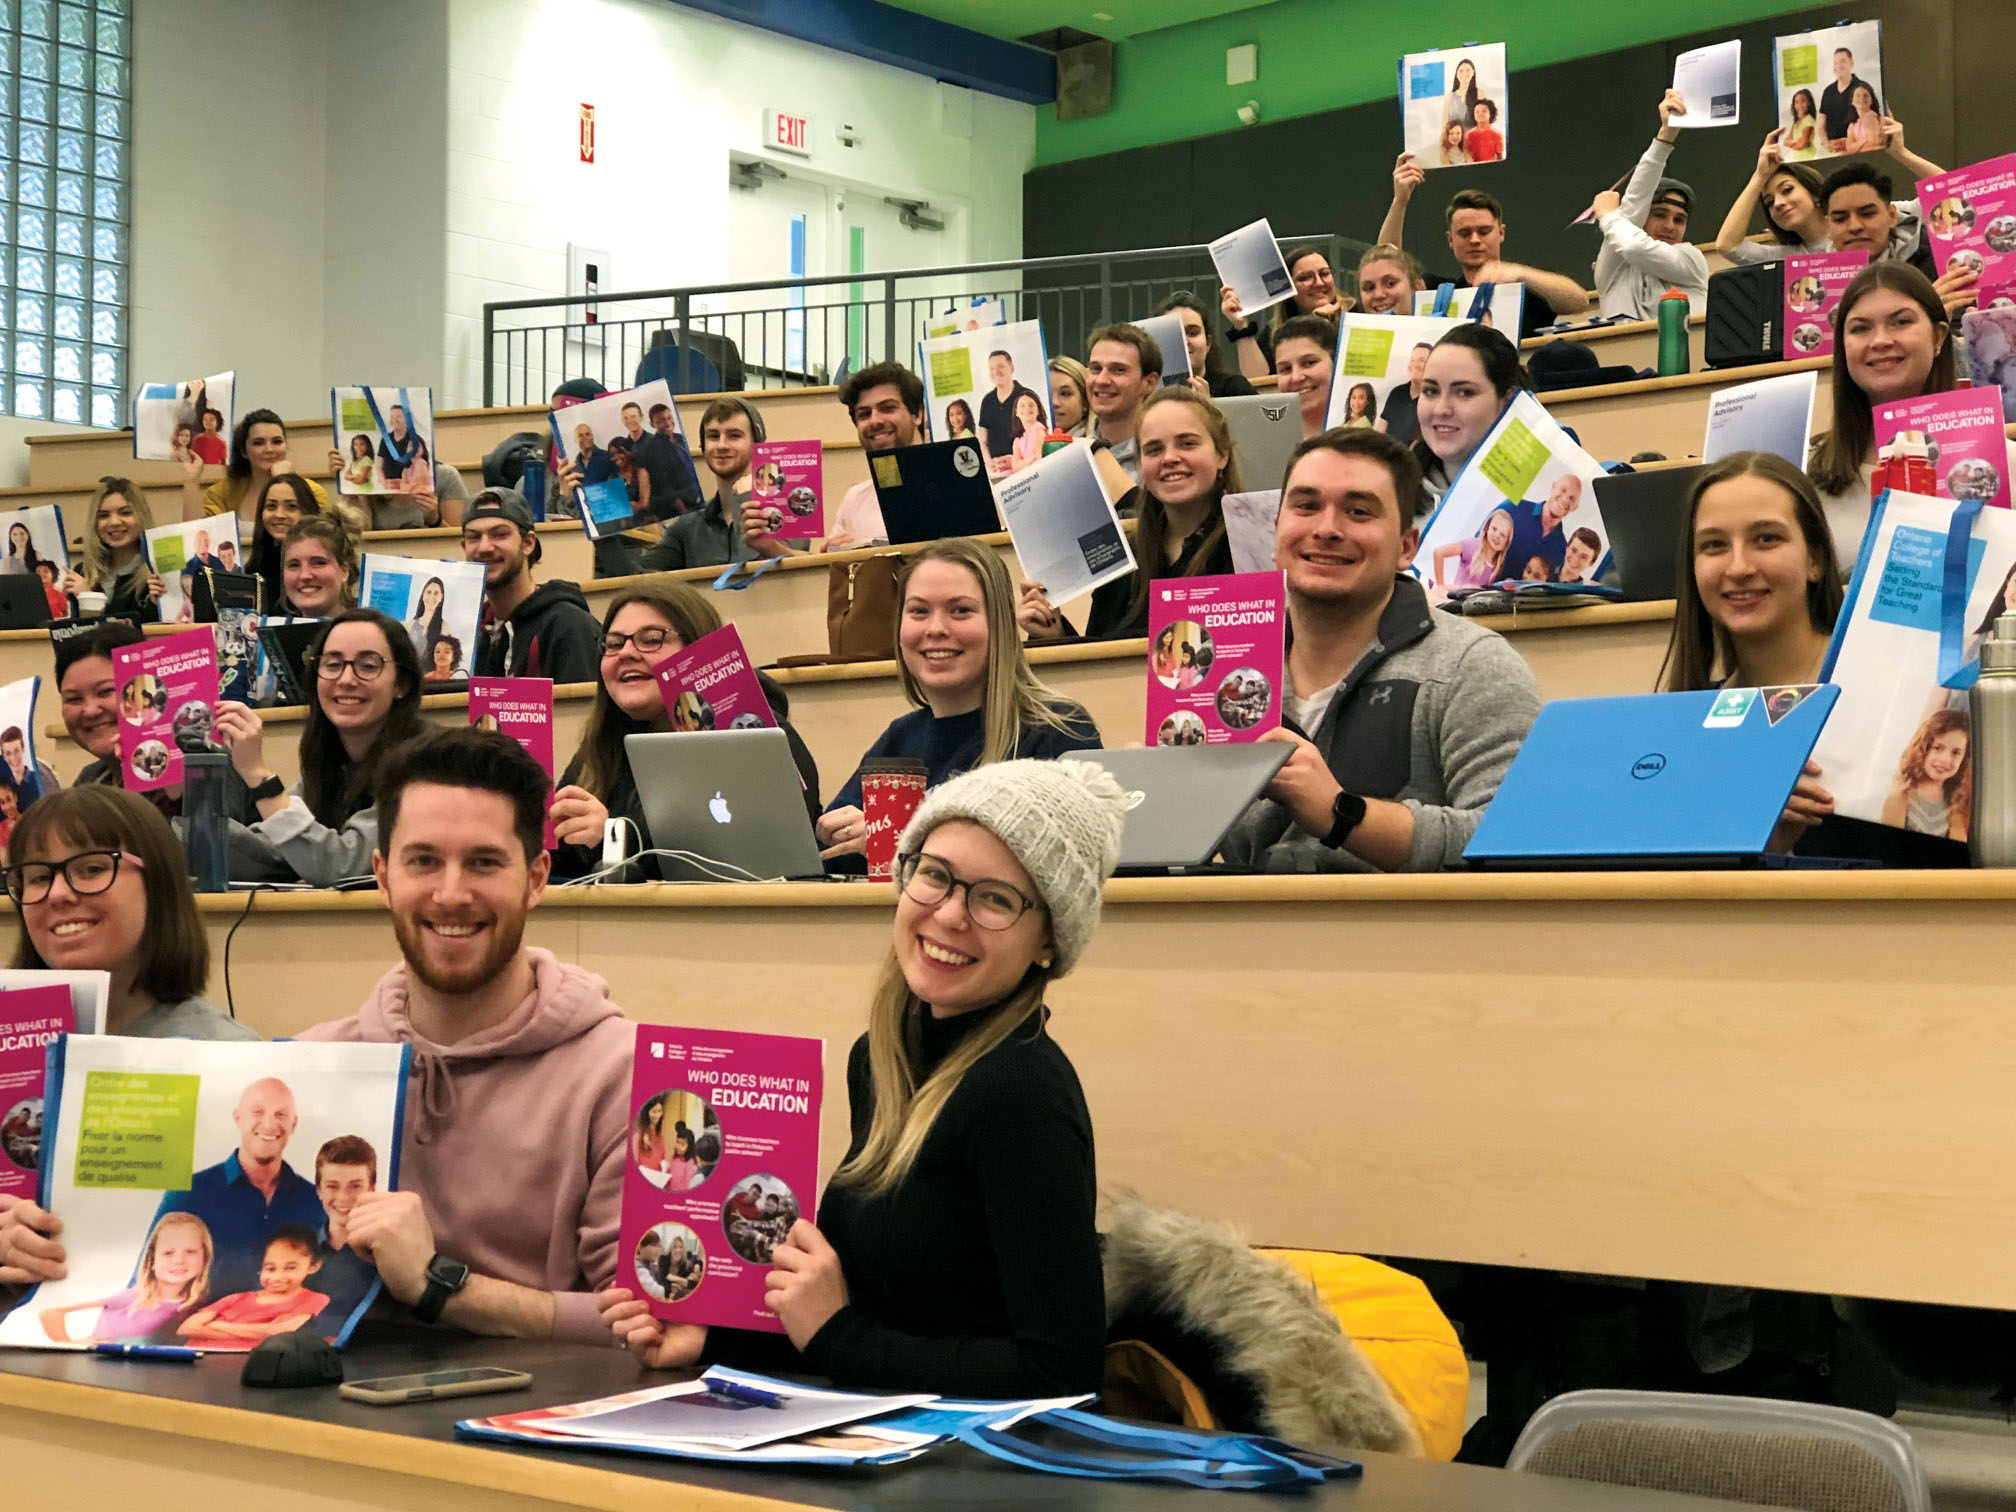 Photo of a large group of teacher candidates in a lecture hall, smiling and holding brochures and bags.